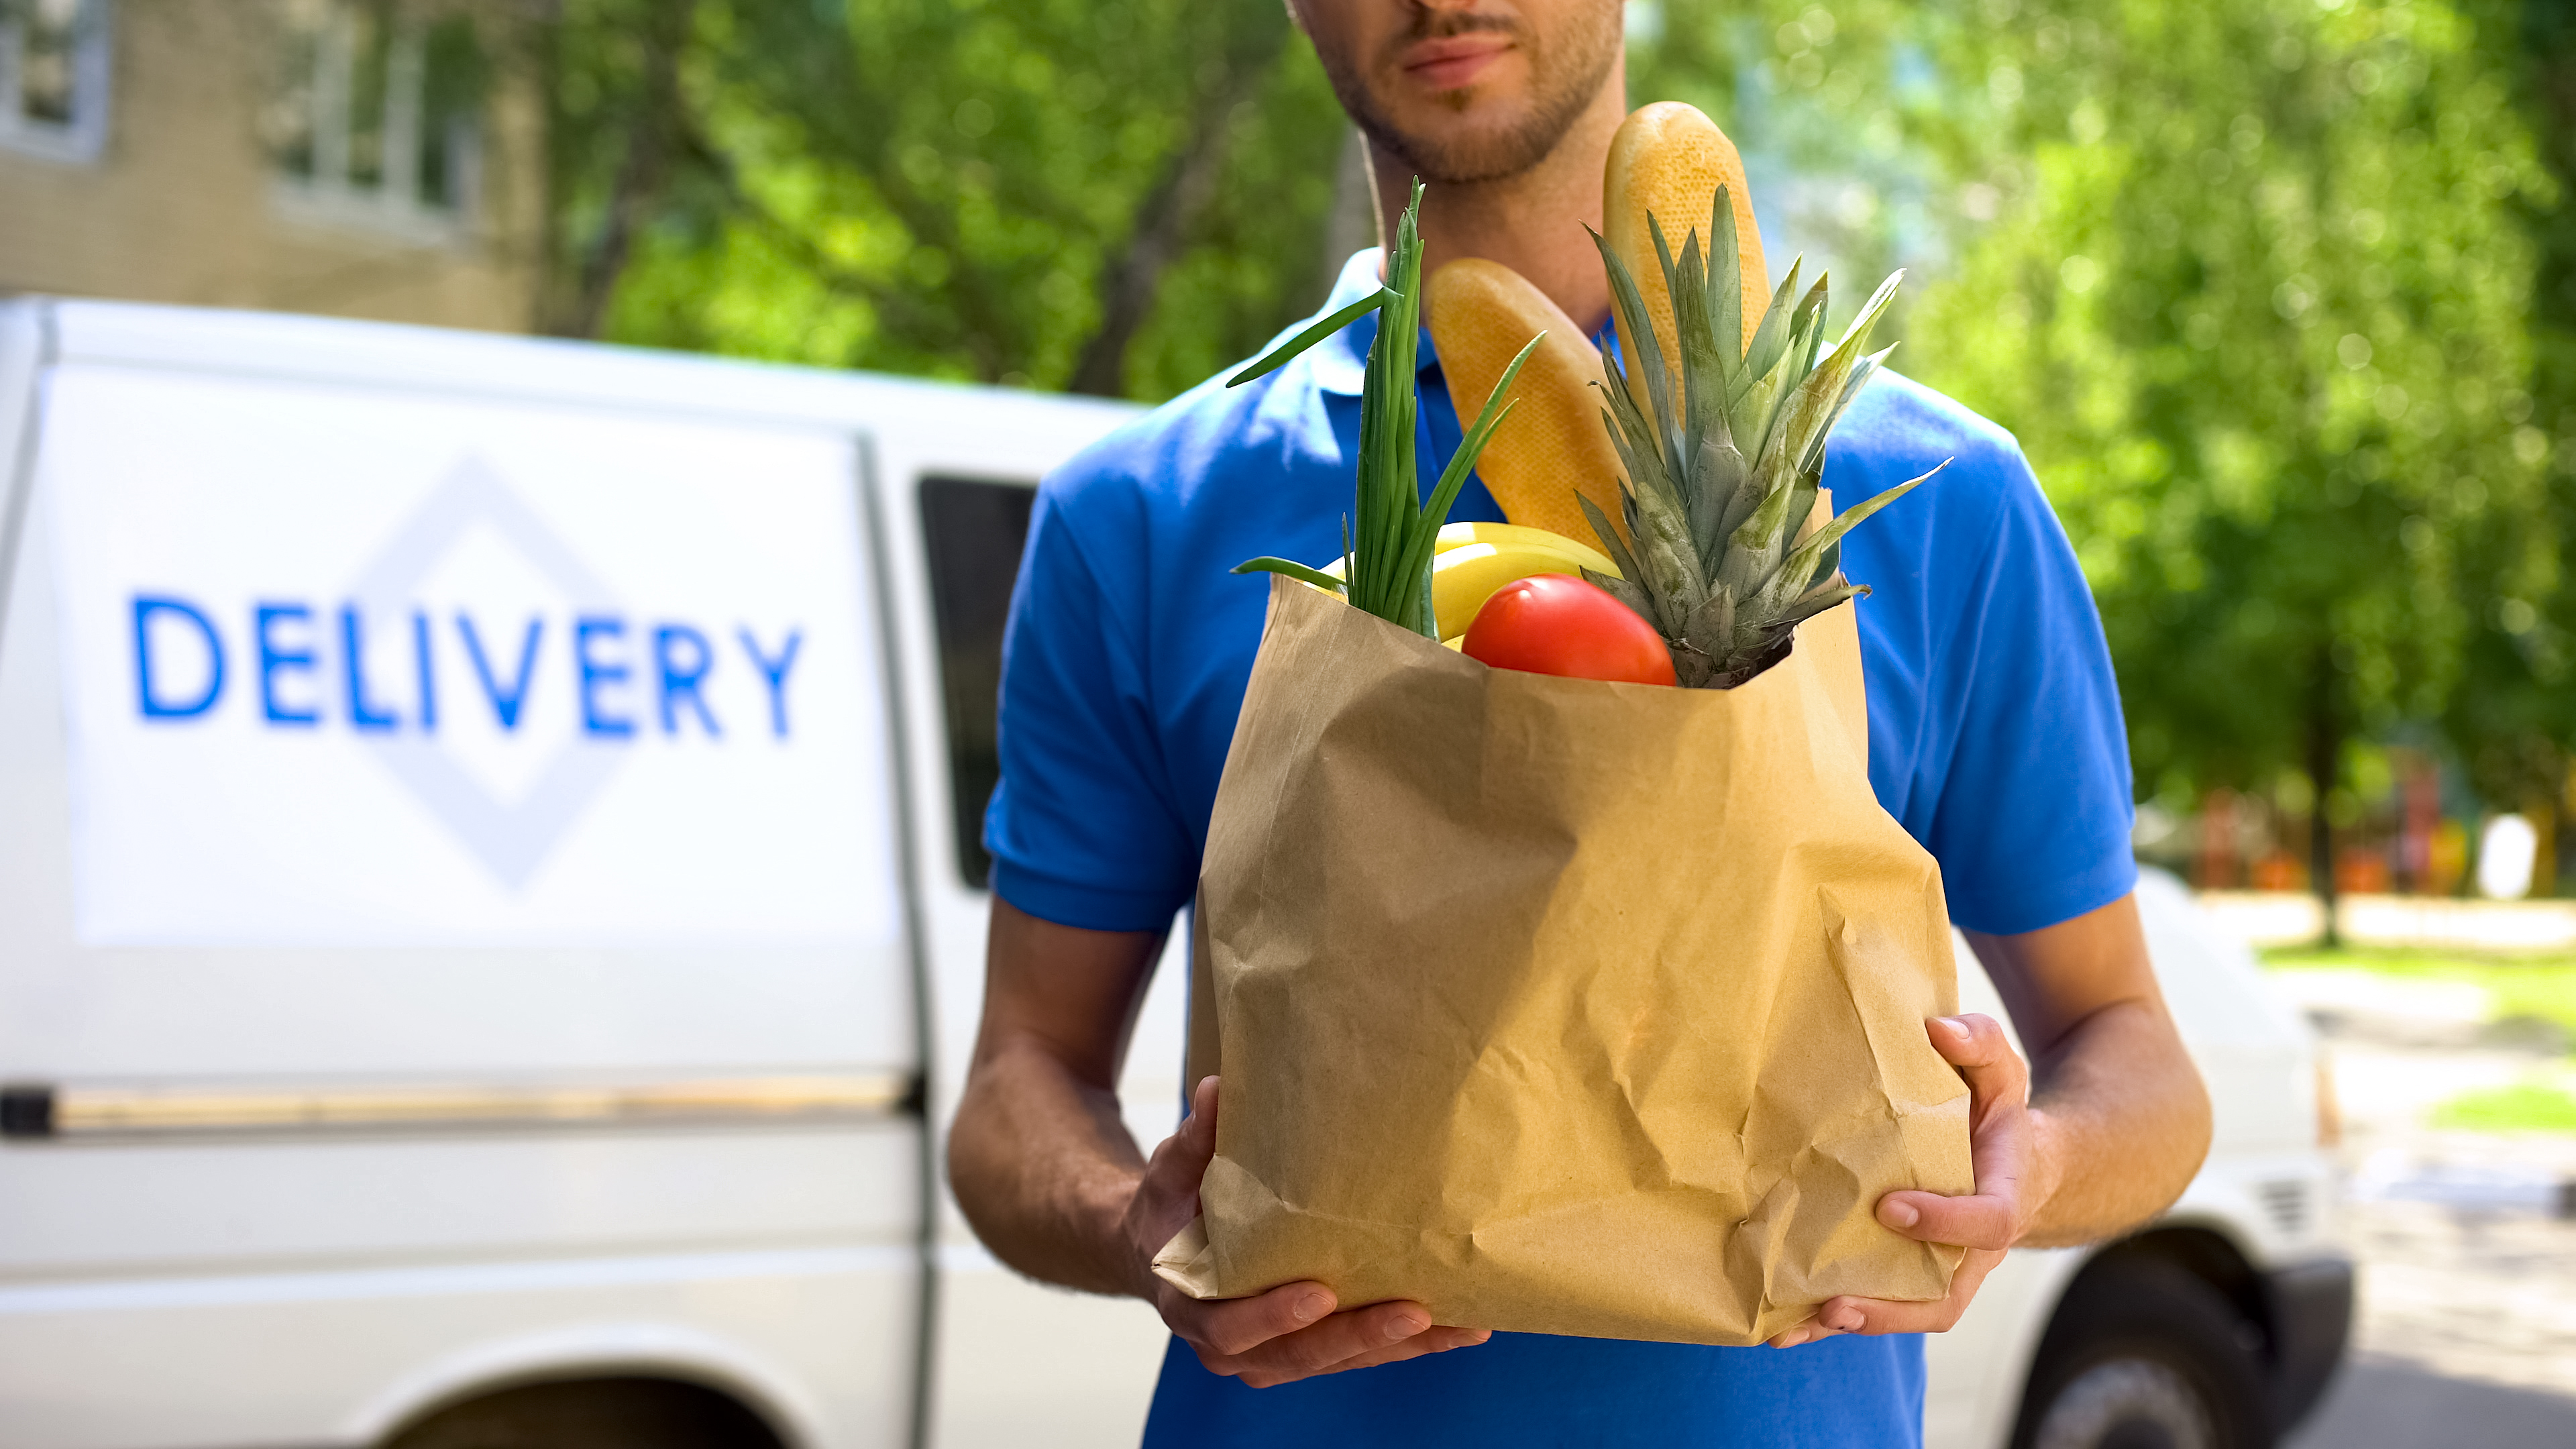 grocery delivery istock-1059113290.jpg